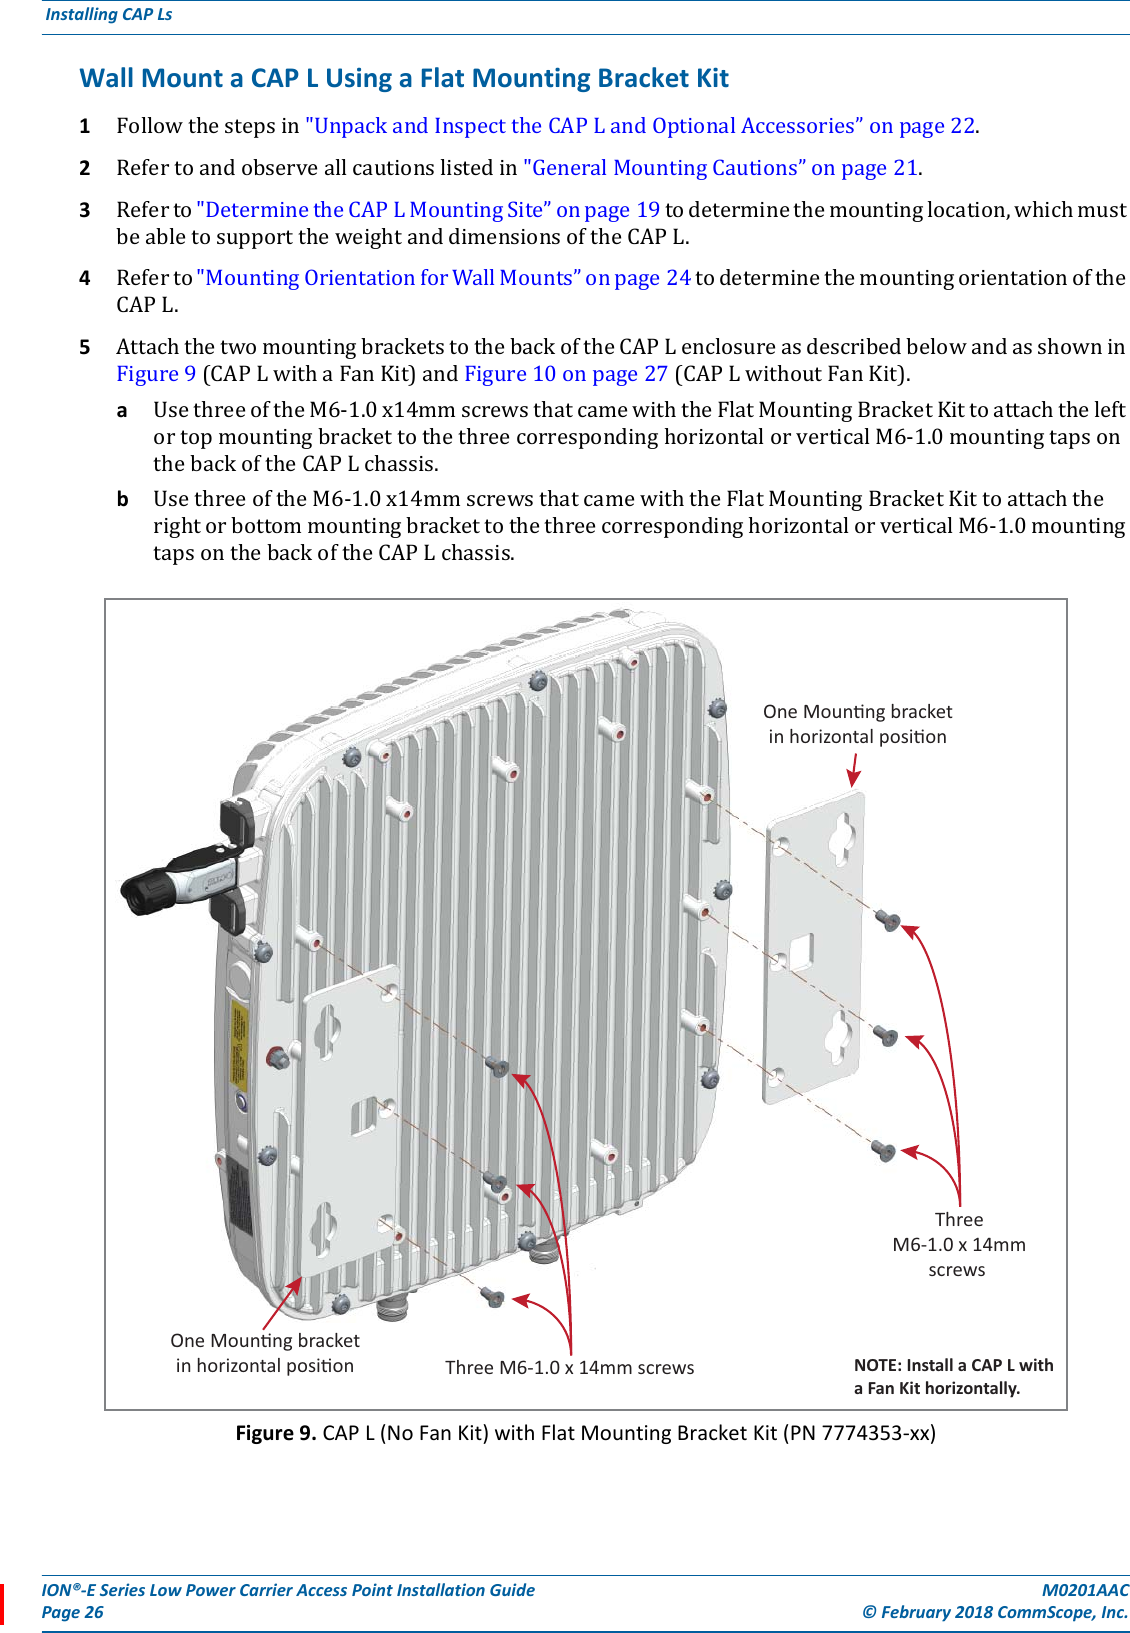 ION®-E Series Low Power Carrier Access Point Installation Guide M0201AACPage 26 © February 2018 CommScope, Inc. Installing CAP Ls  Wall Mount a CAP L Using a Flat Mounting Bracket Kit 1Followthestepsin&quot;UnpackandInspecttheCAPLandOptionalAccessories”onpage22.2Refertoandobserveallcautionslistedin&quot;GeneralMountingCautions”onpage21.3Referto&quot;DeterminetheCAPLMountingSite”onpage19todeterminethemountinglocation,whichmustbeabletosupporttheweightanddimensionsoftheCAPL.4Referto&quot;MountingOrientationforWallMounts”onpage24todeterminethemountingorientationoftheCAPL.5AttachthetwomountingbracketstothebackoftheCAPLenclosureasdescribedbelowandasshowninFigure9(CAPLwithaFanKit)andFigure10onpage27(CAPLwithoutFanKit).aUsethreeoftheM6-1.0x14mmscrewsthatcamewiththeFlatMountingBracketKittoattachtheleftortopmountingbrackettothethreecorrespondinghorizontalorverticalM6-1.0mountingtapsonthebackoftheCAPLchassis.bUsethreeoftheM6-1.0x14mmscrewsthatcamewiththeFlatMountingBracketKittoattachtherightorbottommountingbrackettothethreecorrespondinghorizontalorverticalM6-1.0mountingtapsonthebackoftheCAPLchassis.Figure 9. CAP L (No Fan Kit) with Flat Mounting Bracket Kit (PN 7774353-xx)One Mounng bracketin horizontal posionThreeM6-1.0 x 14mmscrews One Mounng bracketin horizontal posion Three M6-1.0 x 14mm screws NOTE: Install a CAP L witha Fan Kit horizontally.